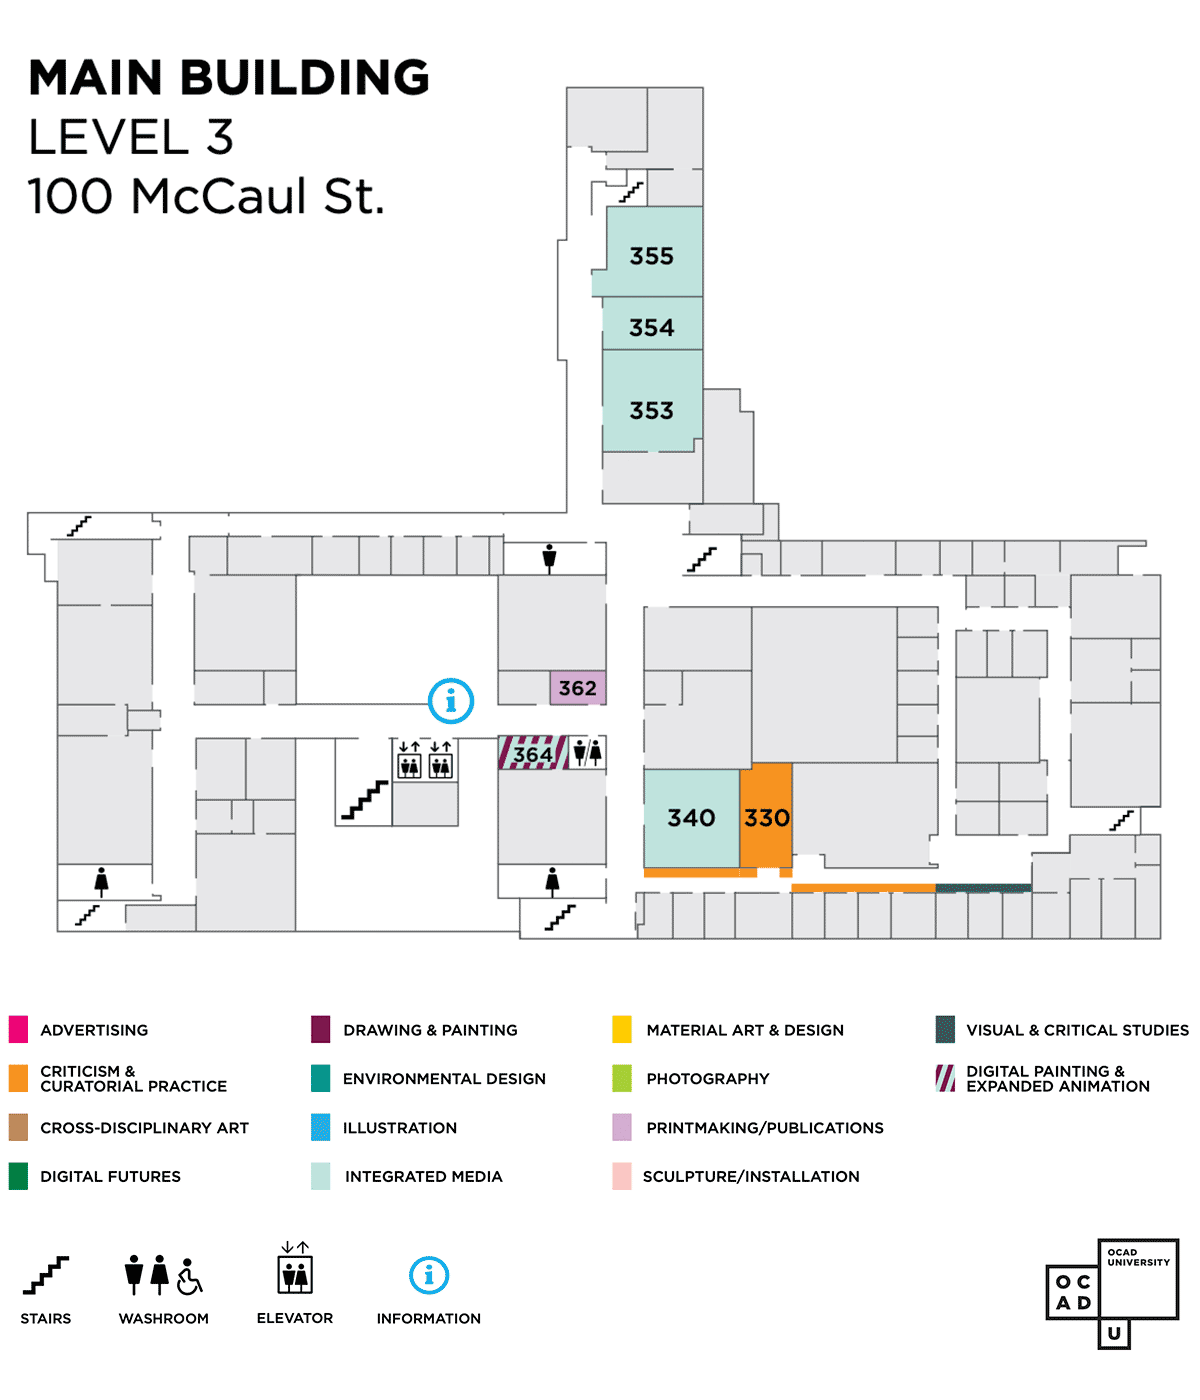 Map of 100 McCaul street level 3. Exhibitions in rooms 330, 340, 353, 354, 355, 362, 364.